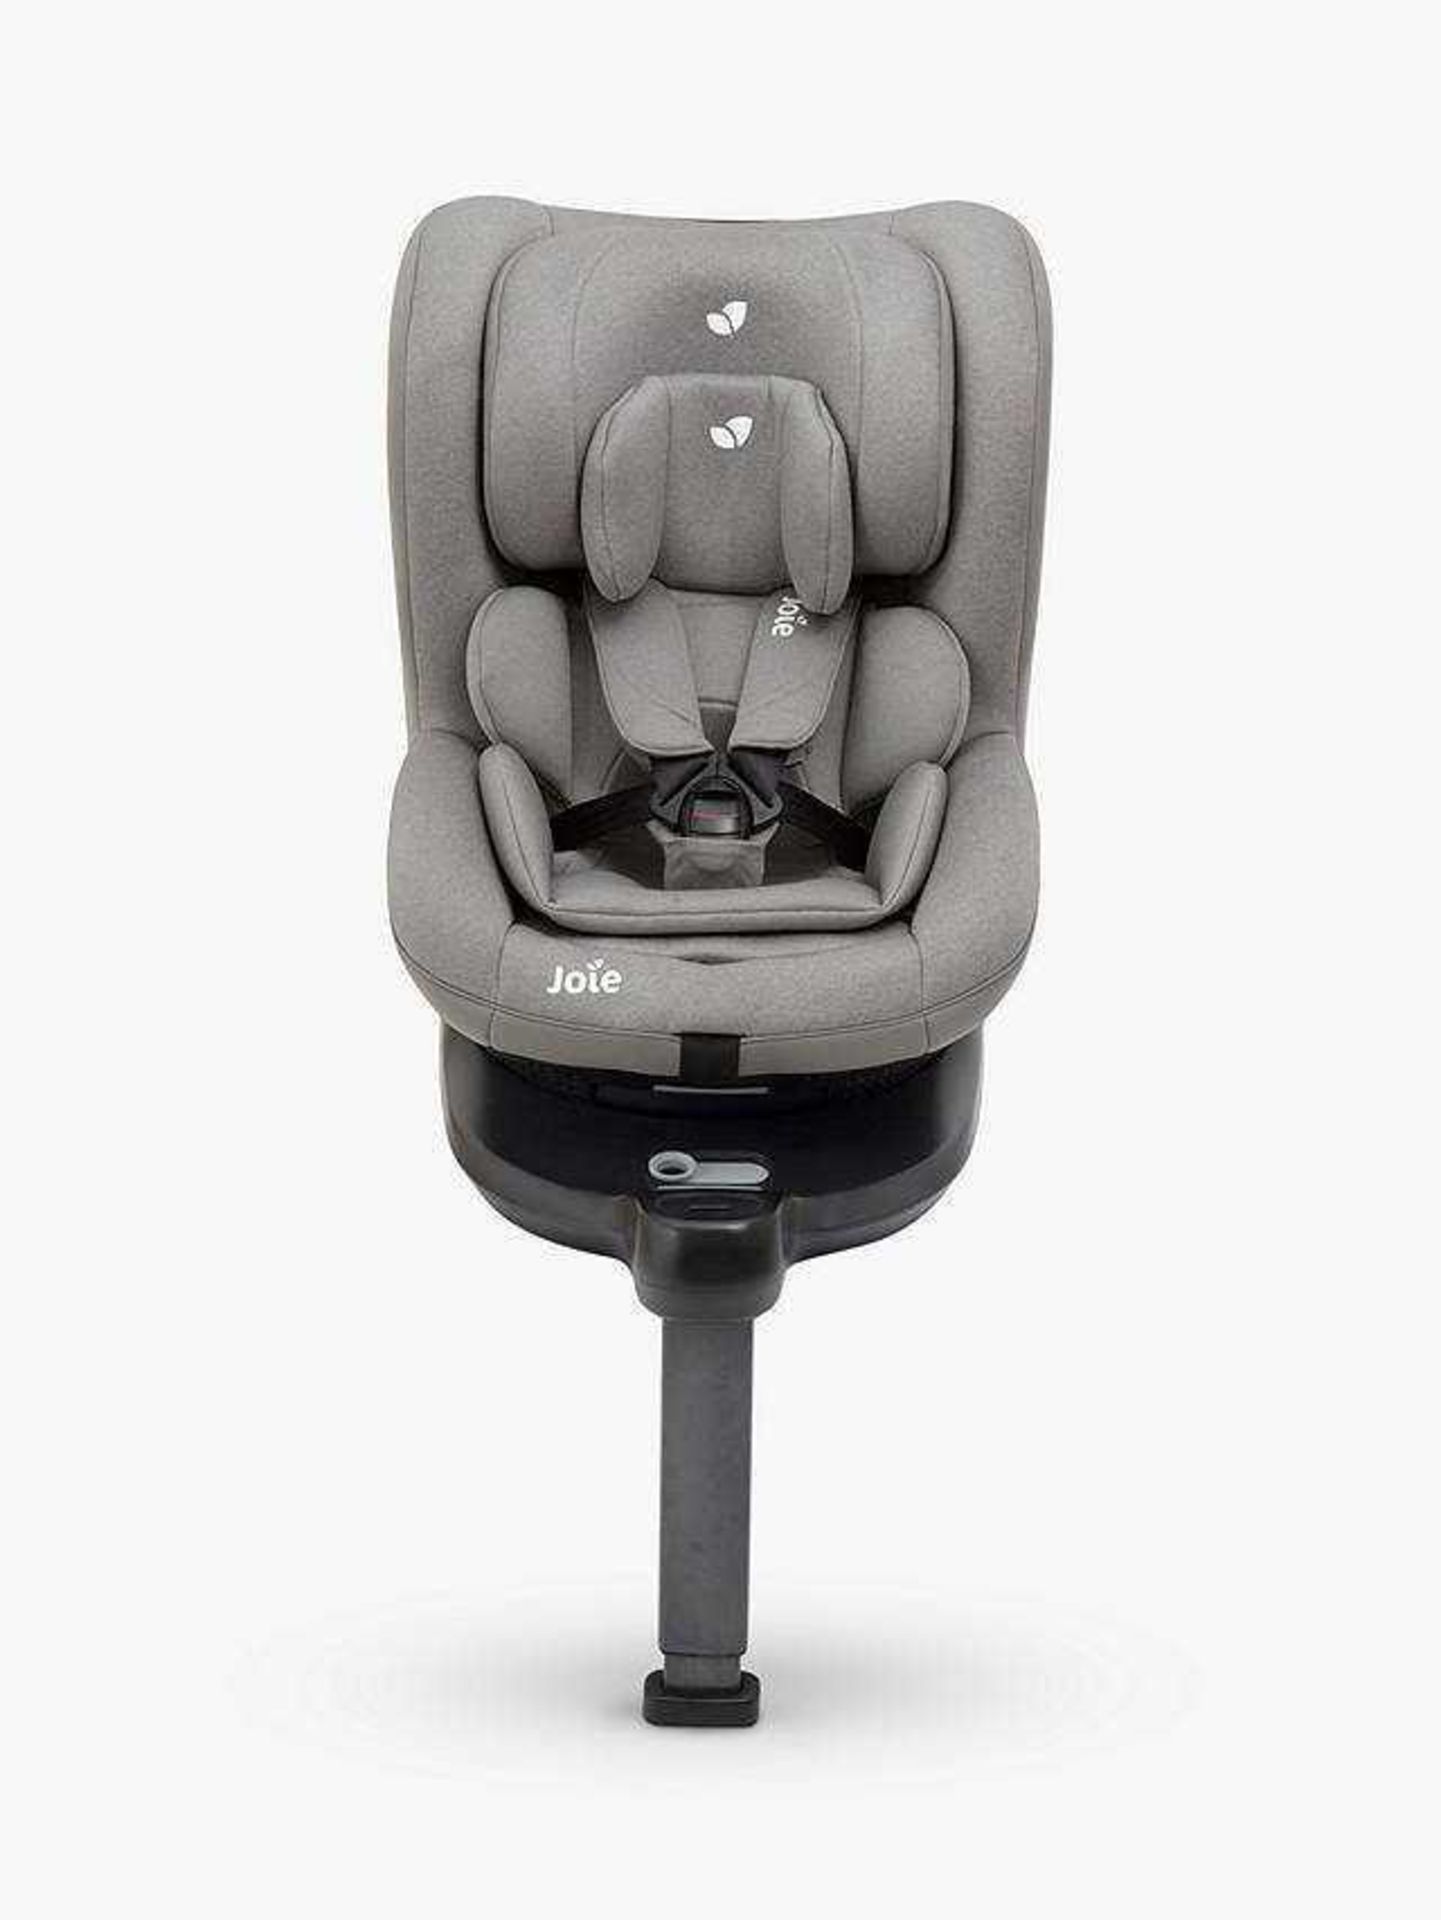 Rrp £200 Unboxed Joie Spin 360 Baby Children'S Safety Car Seats With Base